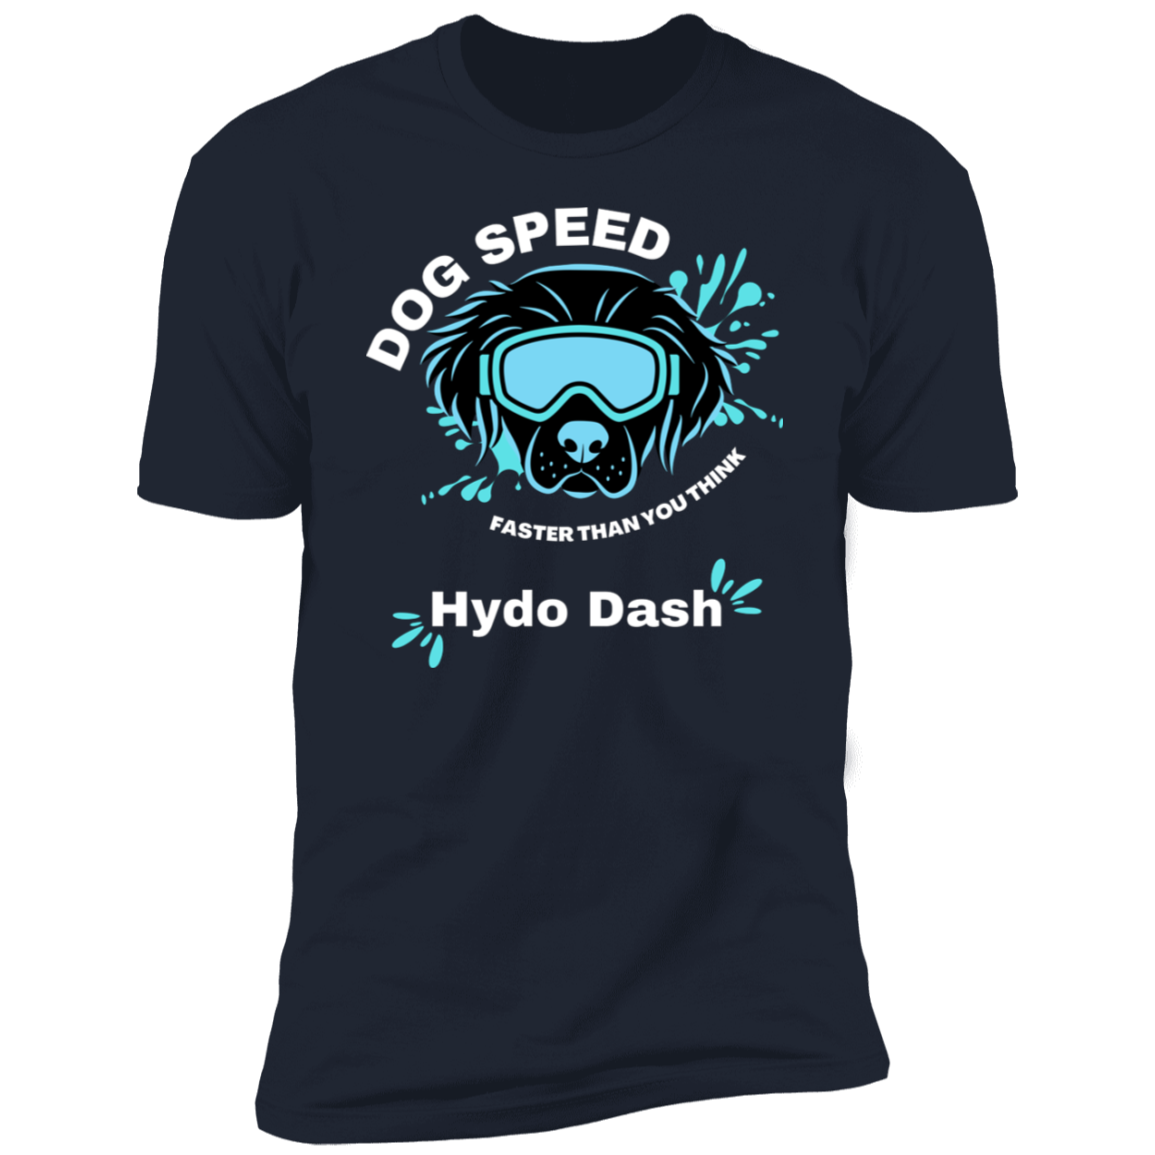 Dog Speed Faster Than You Think Hydro Dash T-shirt, Hydro Dash shirt dog shirt for humans, in navy blue